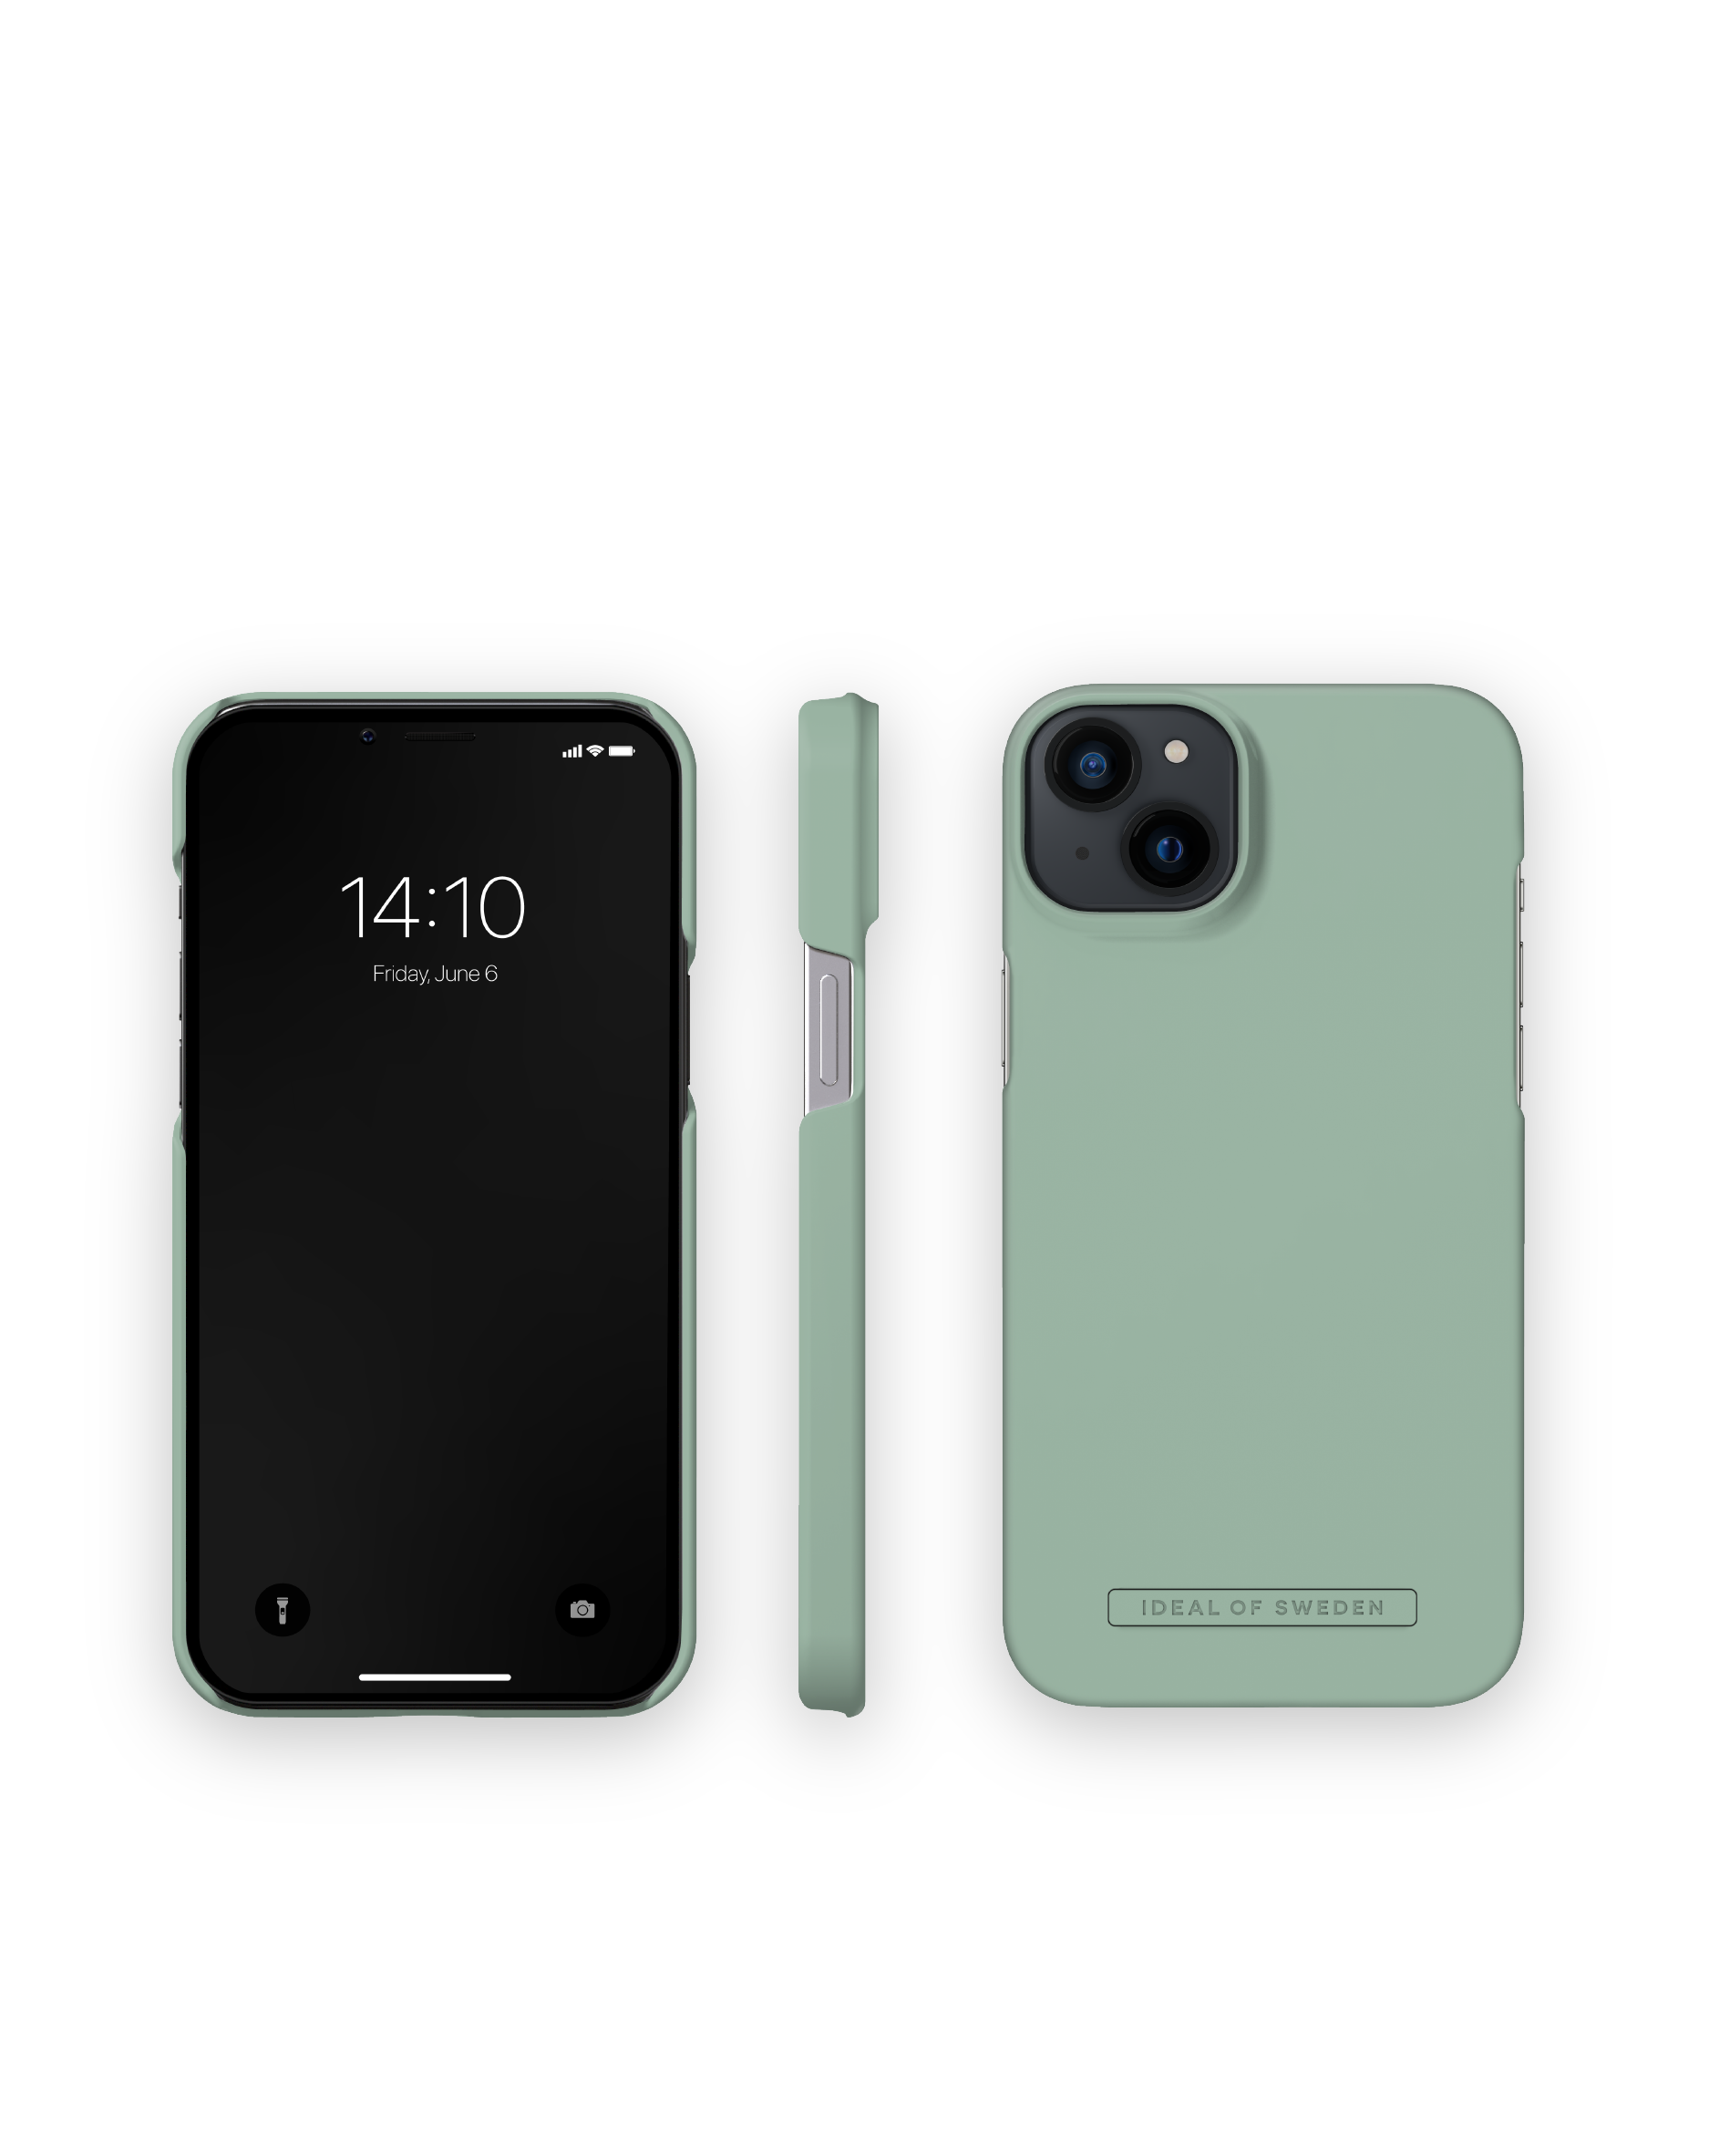 IDEAL OF iPhone IDFCSS22-I2267-419, Sage Plus, SWEDEN Apple, Backcover, 14 Green